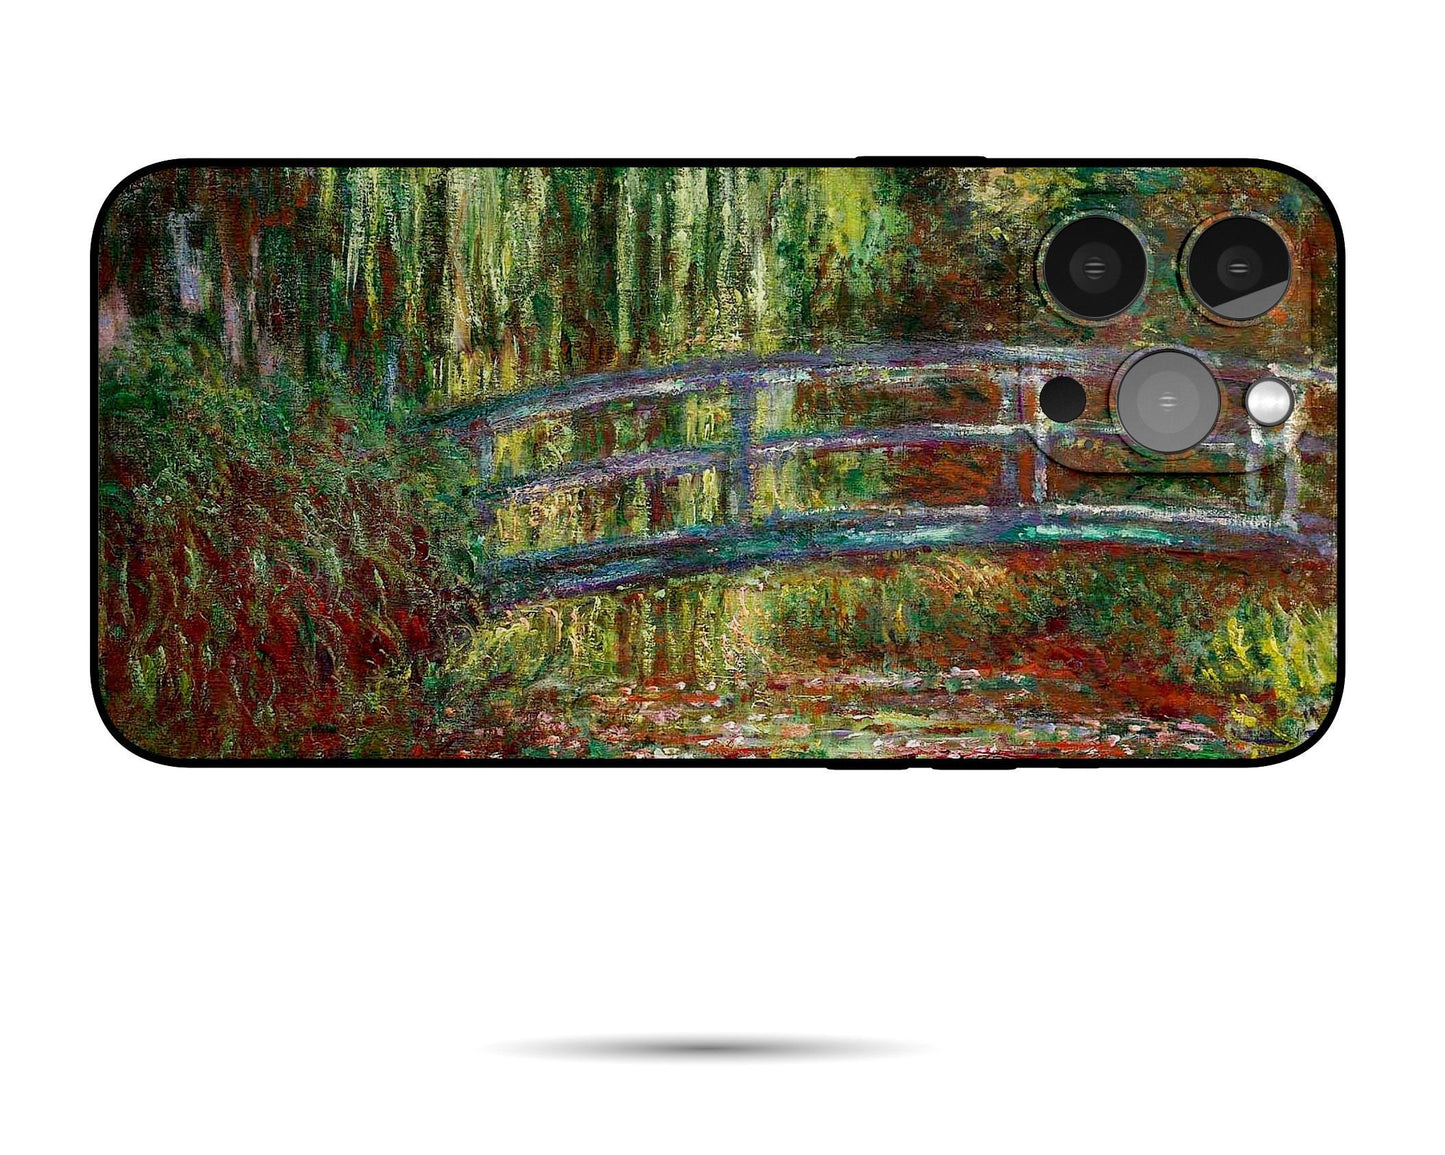 Claude Monet The Water-Lily Pond Iphone Cover, 11 Pro Case, Iphone 7, Iphone 8 Plus Case Art, Iphone Protective Case, Iphone Case Silicone